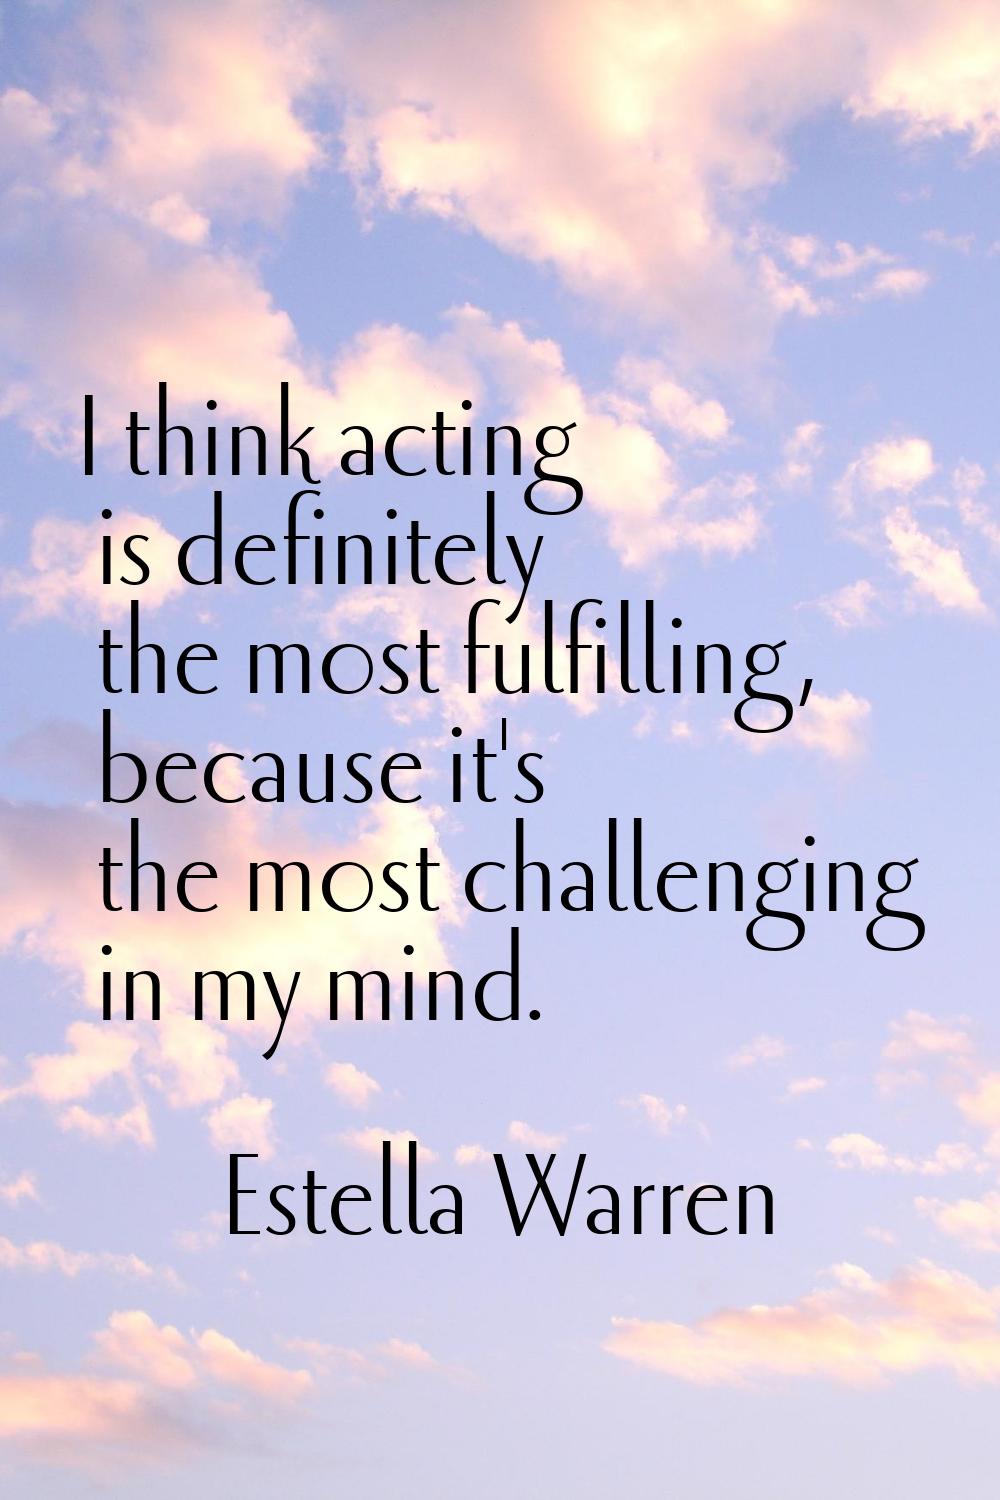 I think acting is definitely the most fulfilling, because it's the most challenging in my mind.